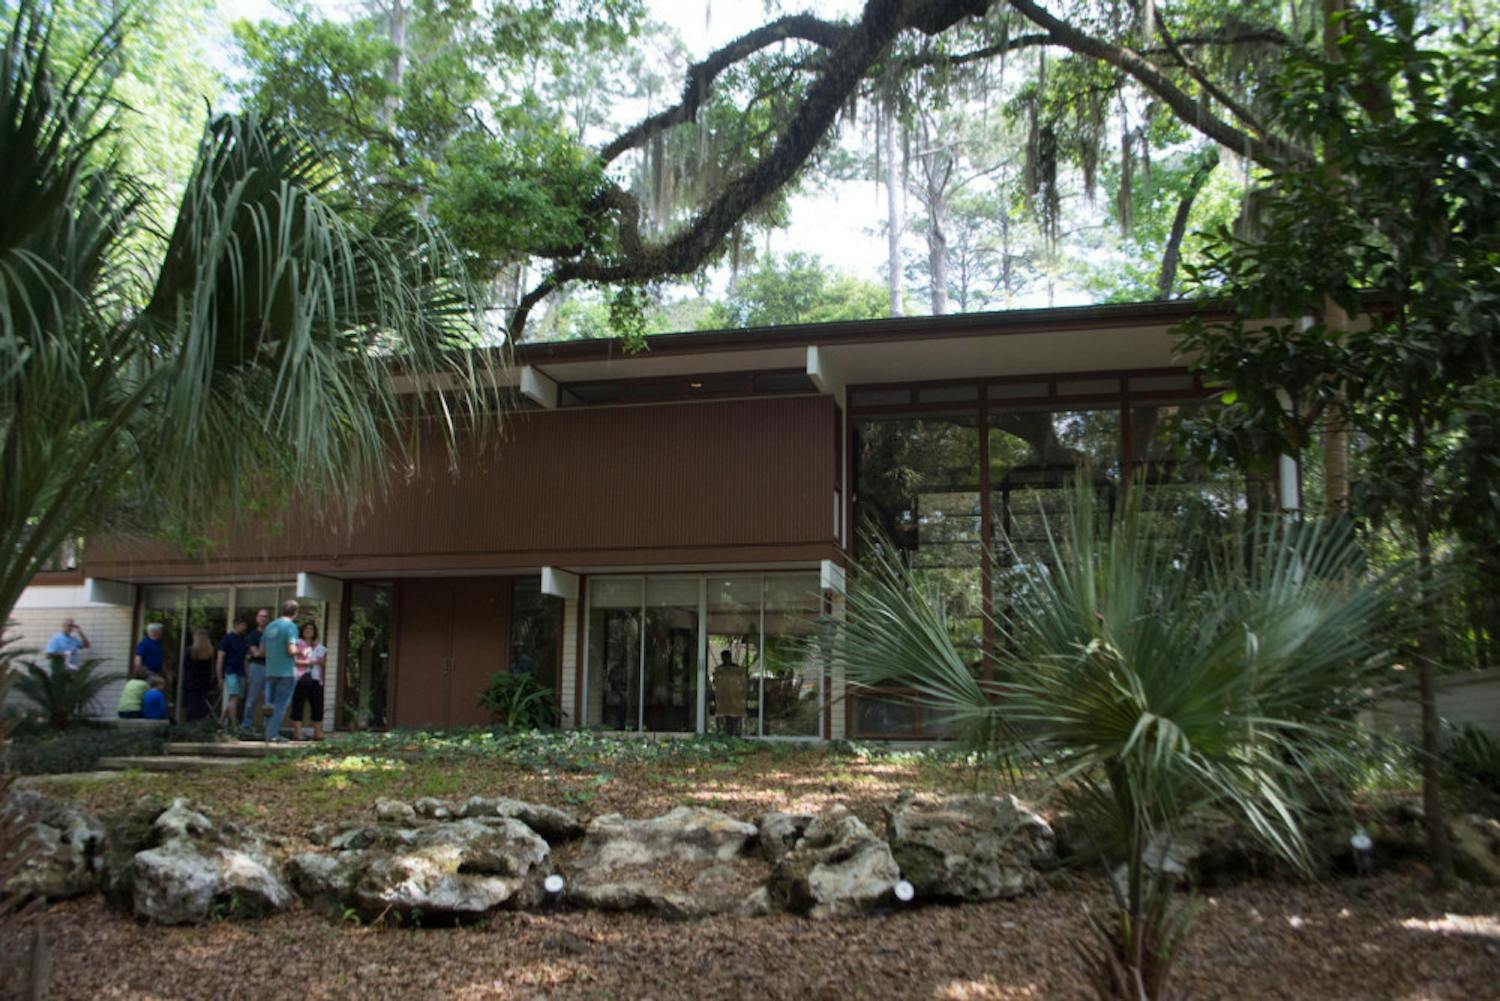 The 3105 SW 5th Court house was one of the six mid-century modern homes featured on the Gainesville Modern Weekend tour&nbsp;on Saturday. Each house had contractors and/or the homeowners on-site to answer questions.&nbsp;